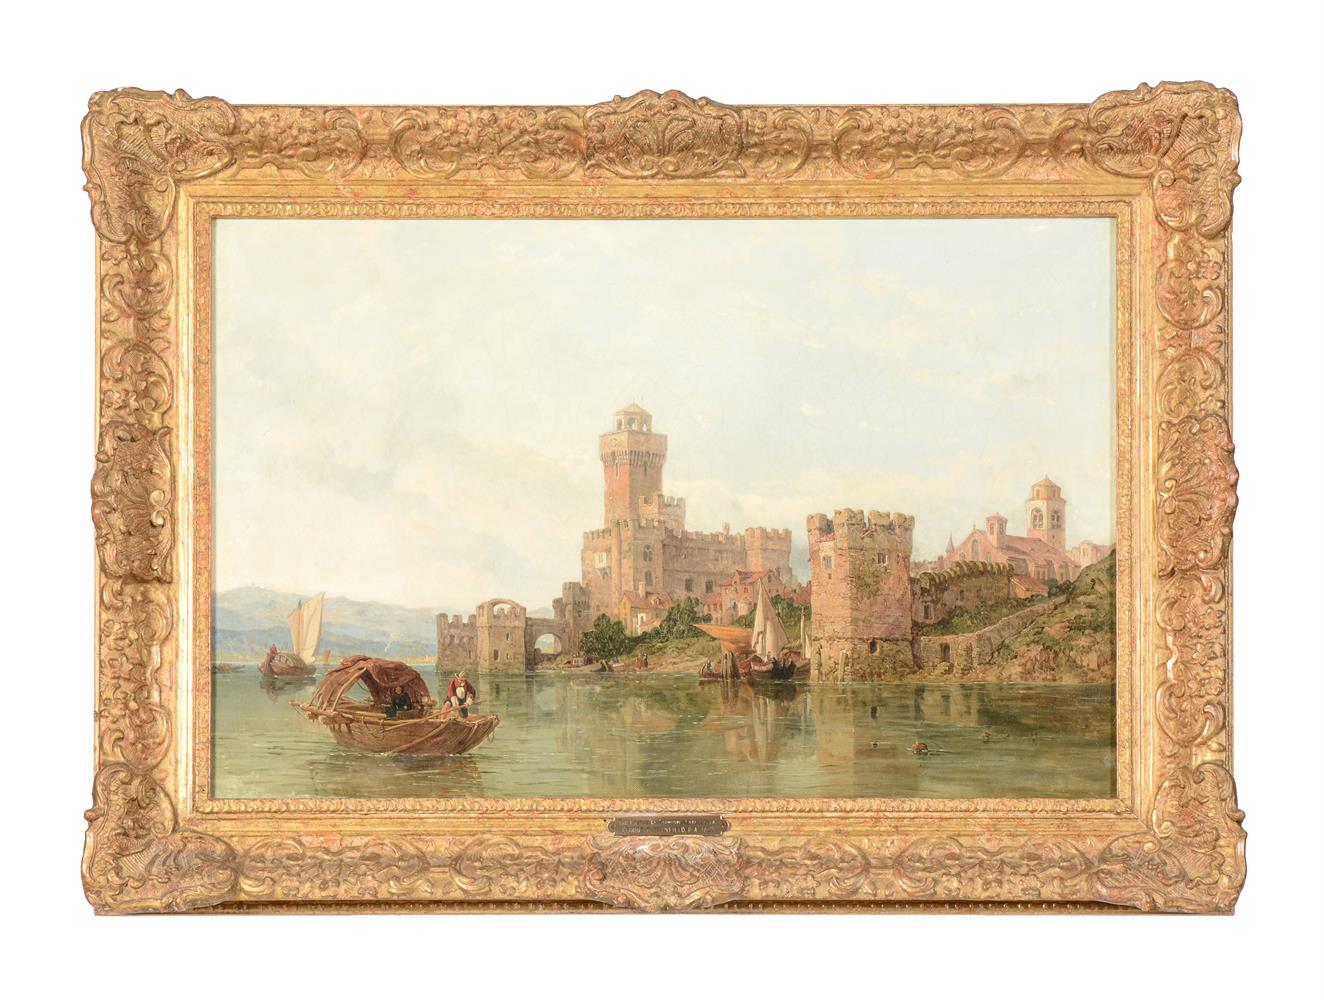 GEORGE CLARKSON STANFIELD (BRITISH 1828 - 1878), THE CASTLE OF SIRMIONE - Image 2 of 3